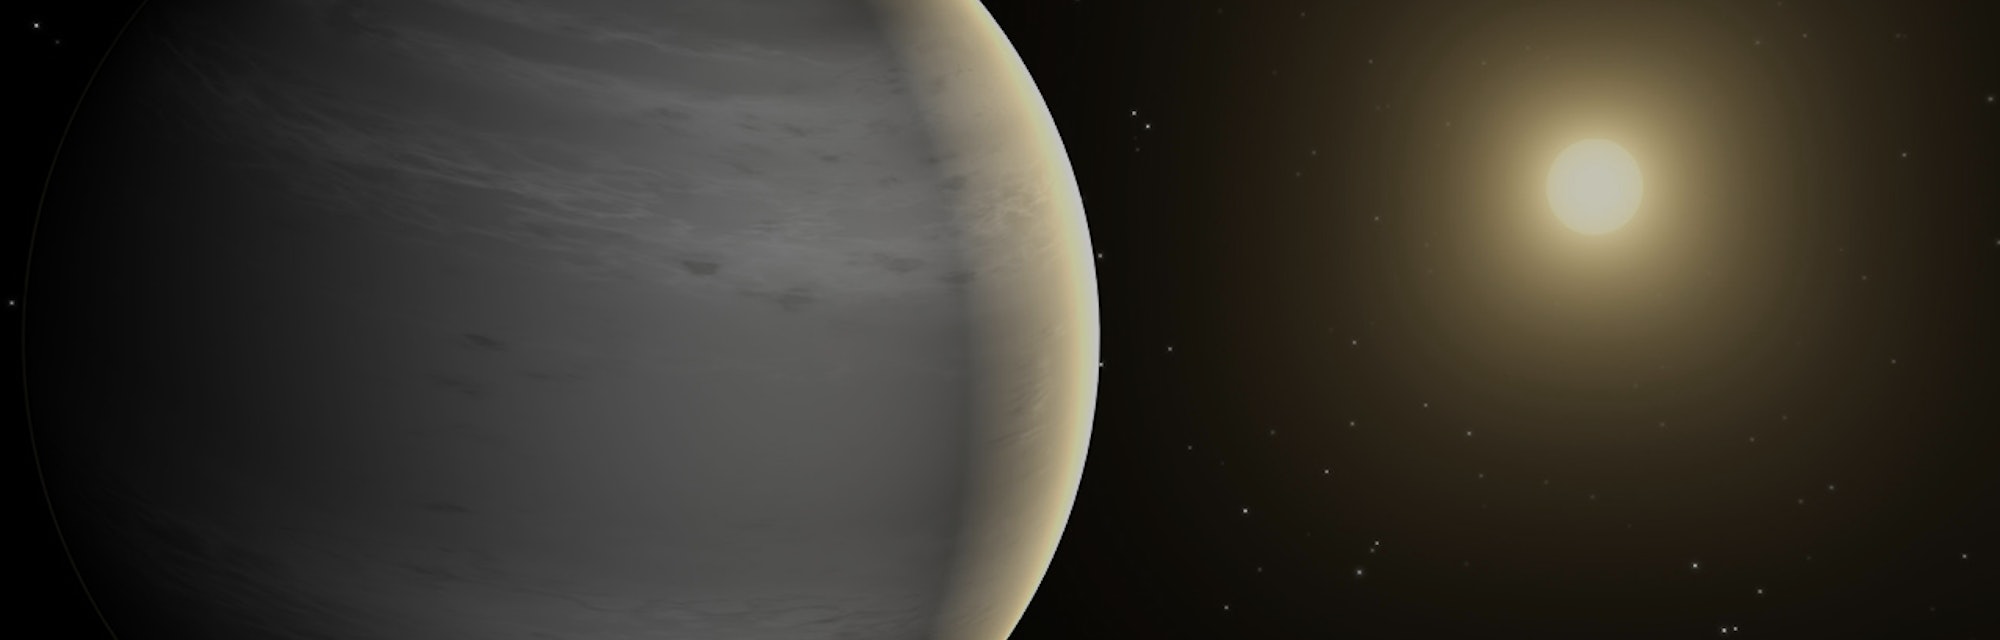 gas giant planet